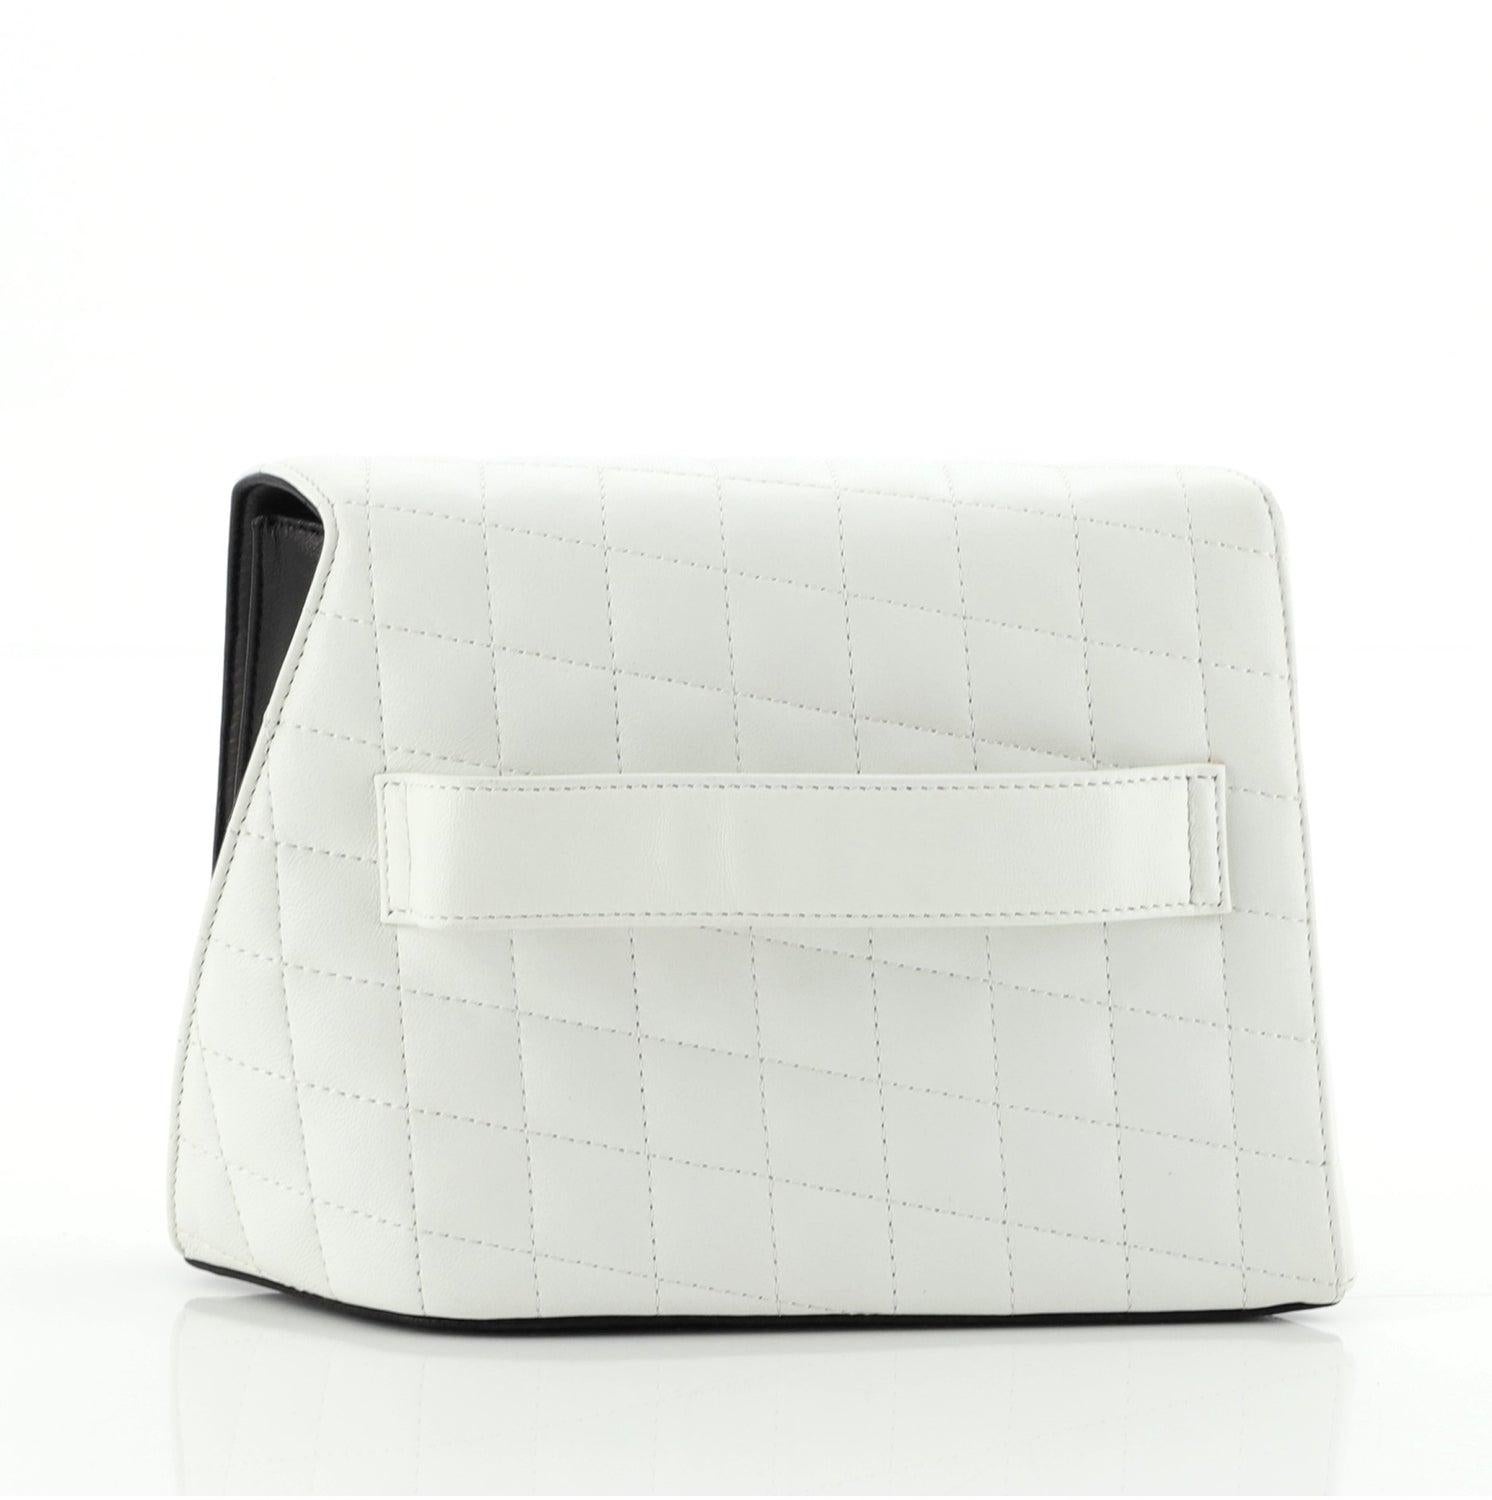 Chanel 2013 Runway Hand Through White Quilted Lambskin Clutch Bag For Sale 1